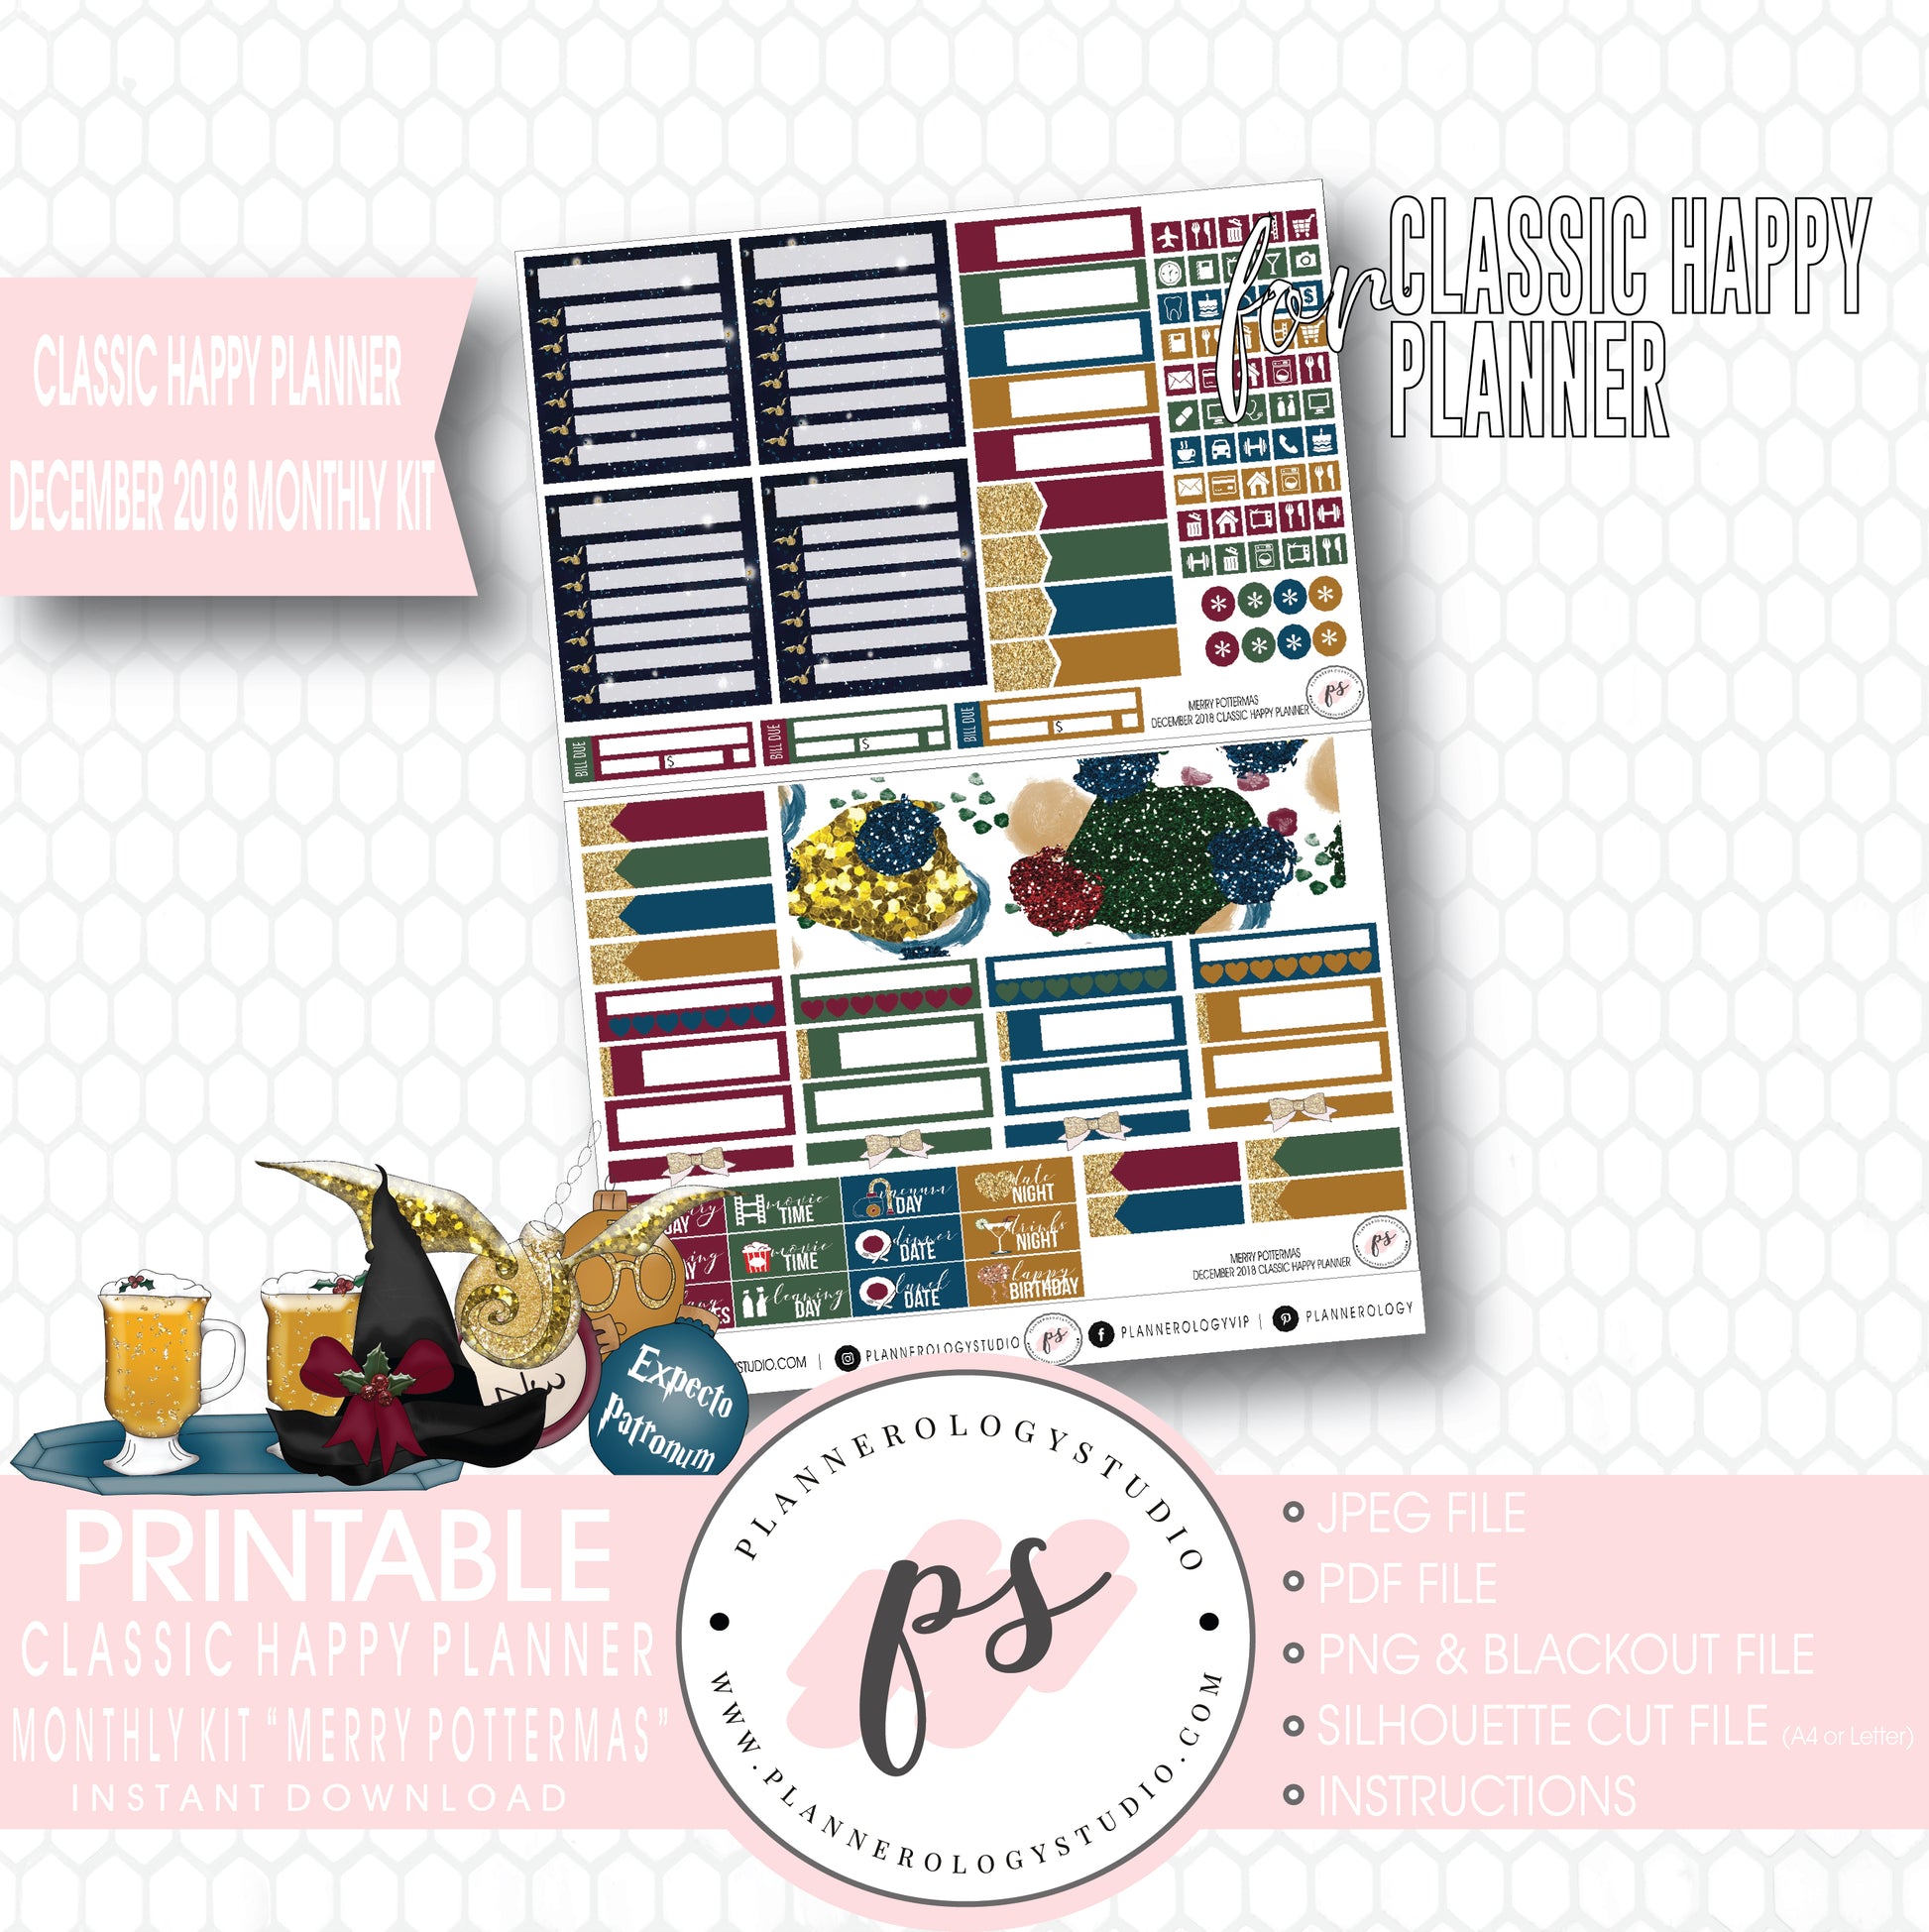 Merry Pottermas (Harry Potter) Christmas December 2018 Monthly View Kit Digital Printable Planner Stickers (for use with Classic Happy Planner) - Plannerologystudio